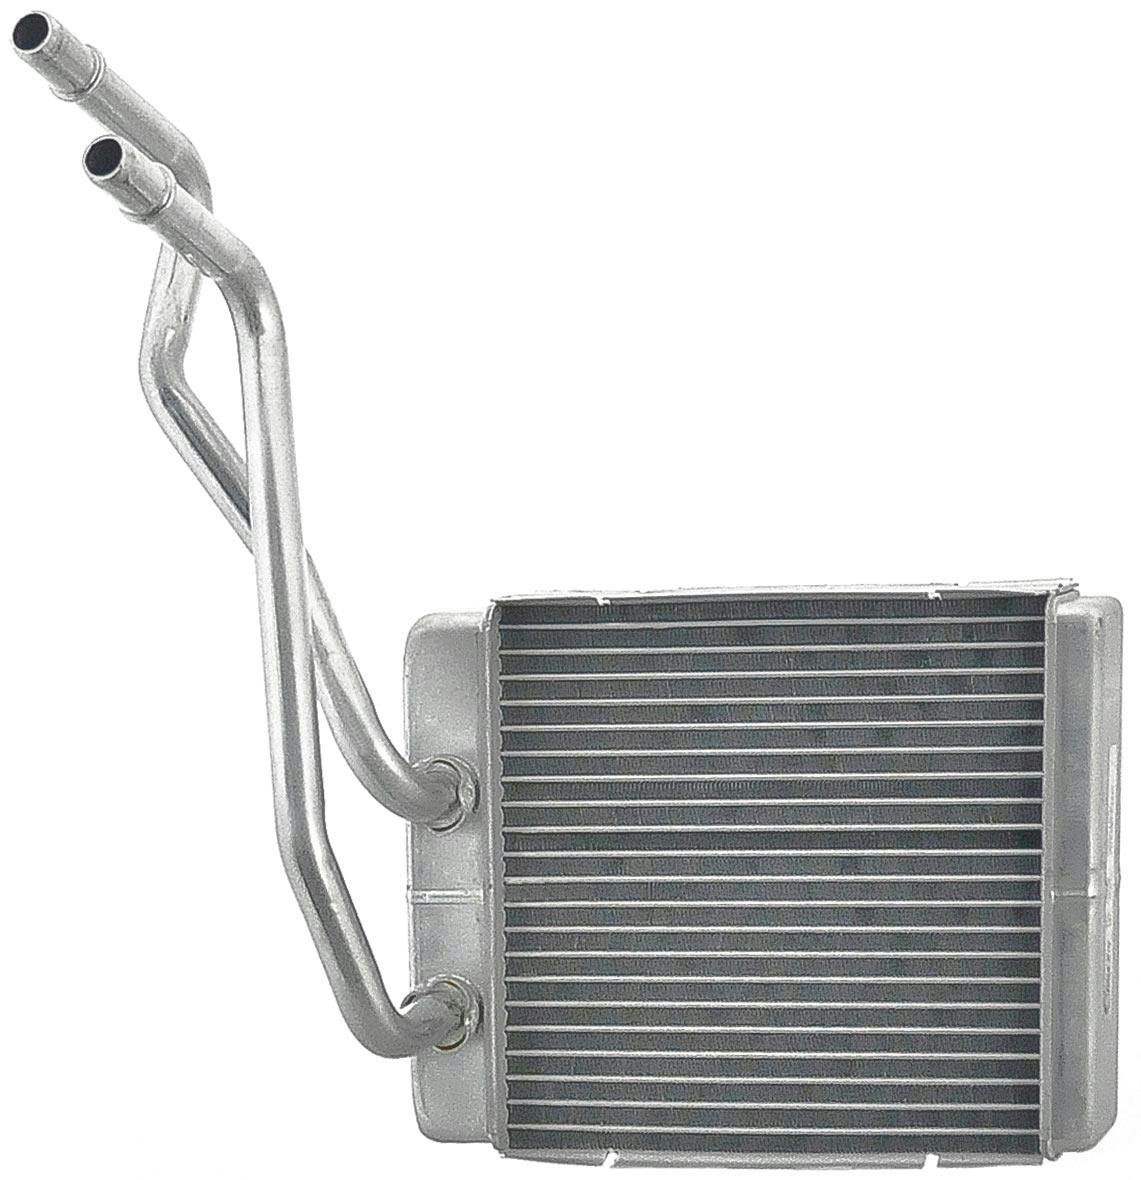 Heater Core, for Ford - 6943